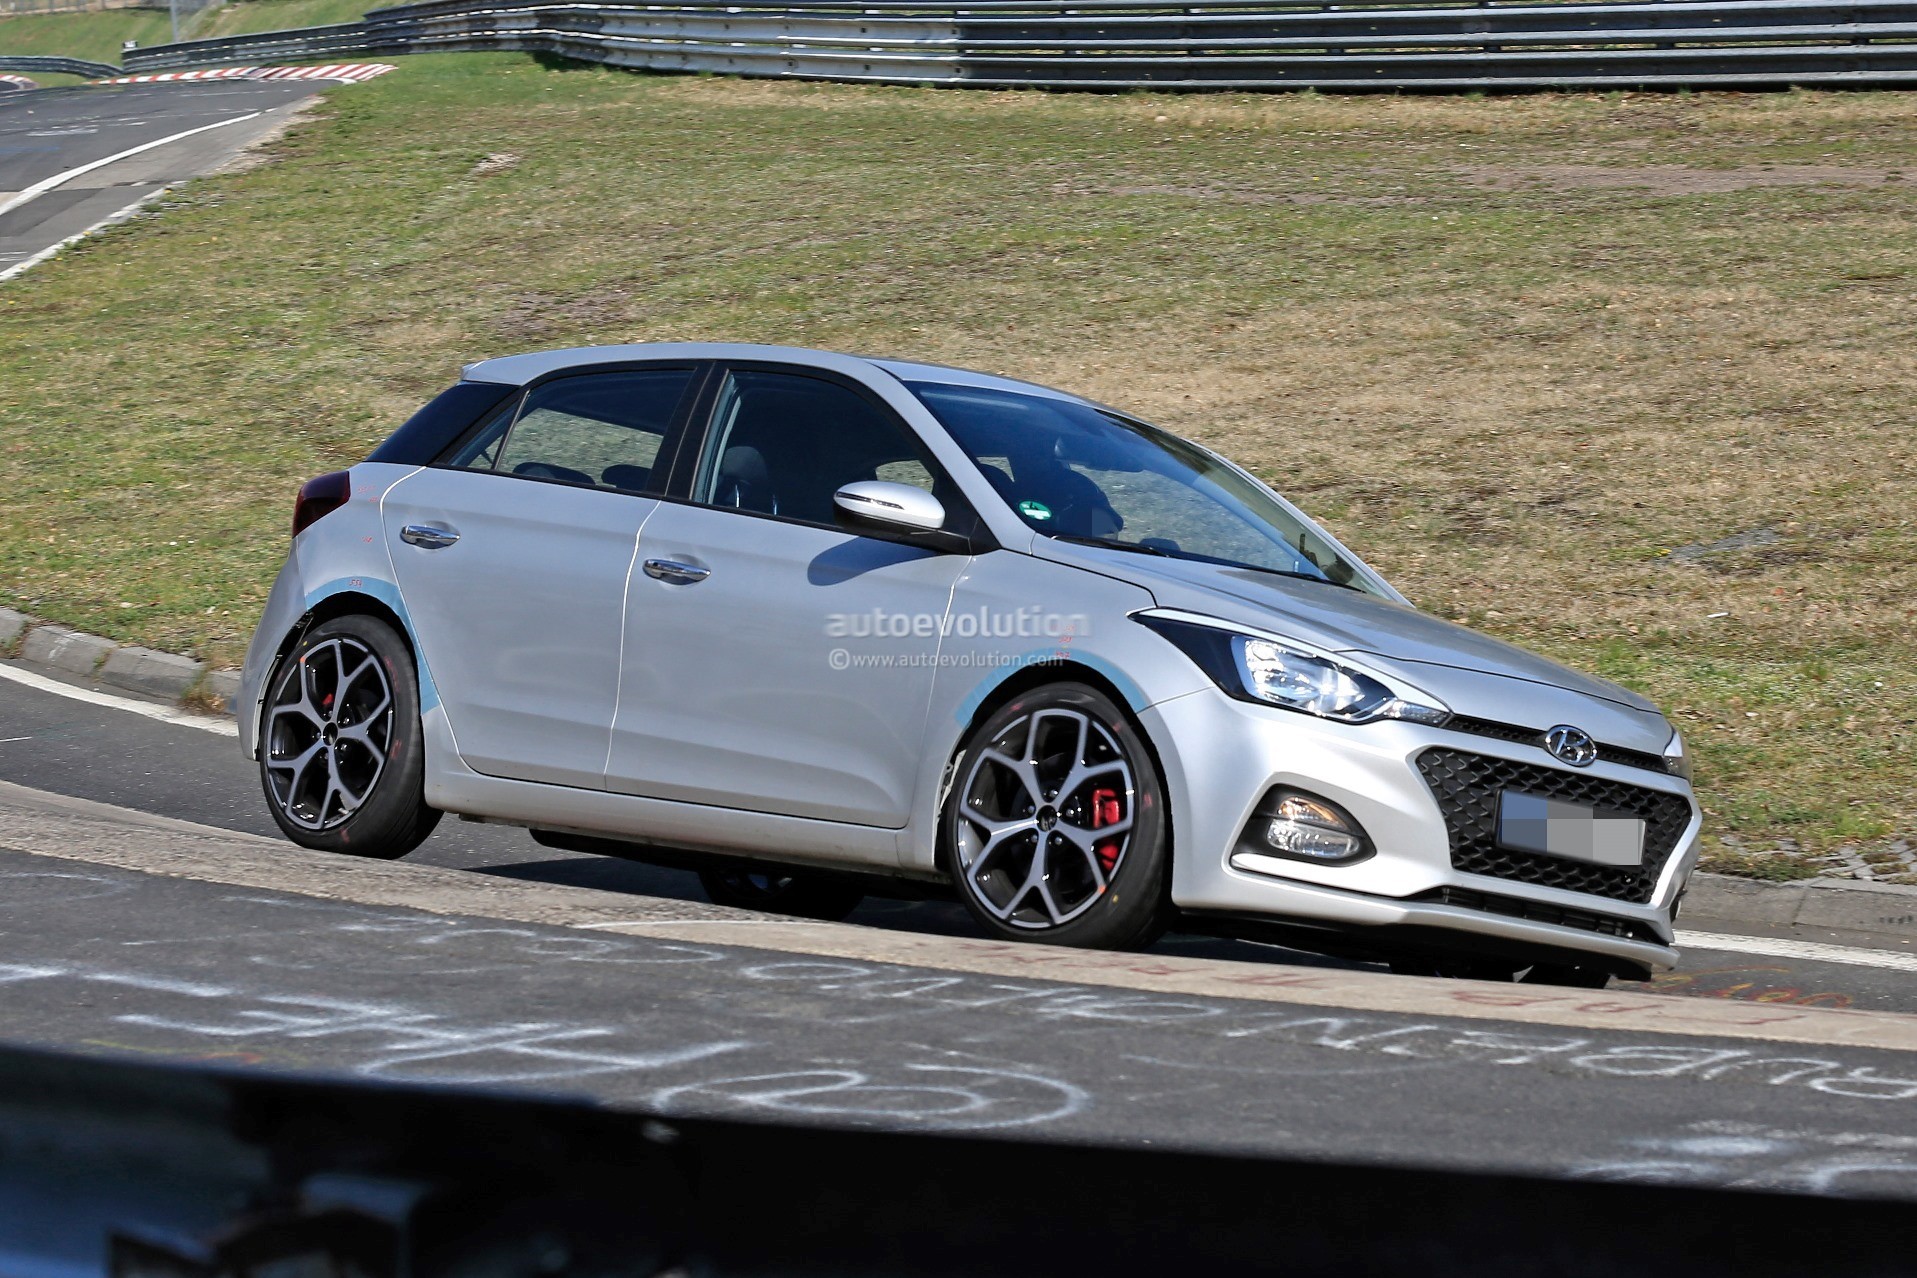 hyundai-i20-n-spied-for-the-first-time_23.jpg